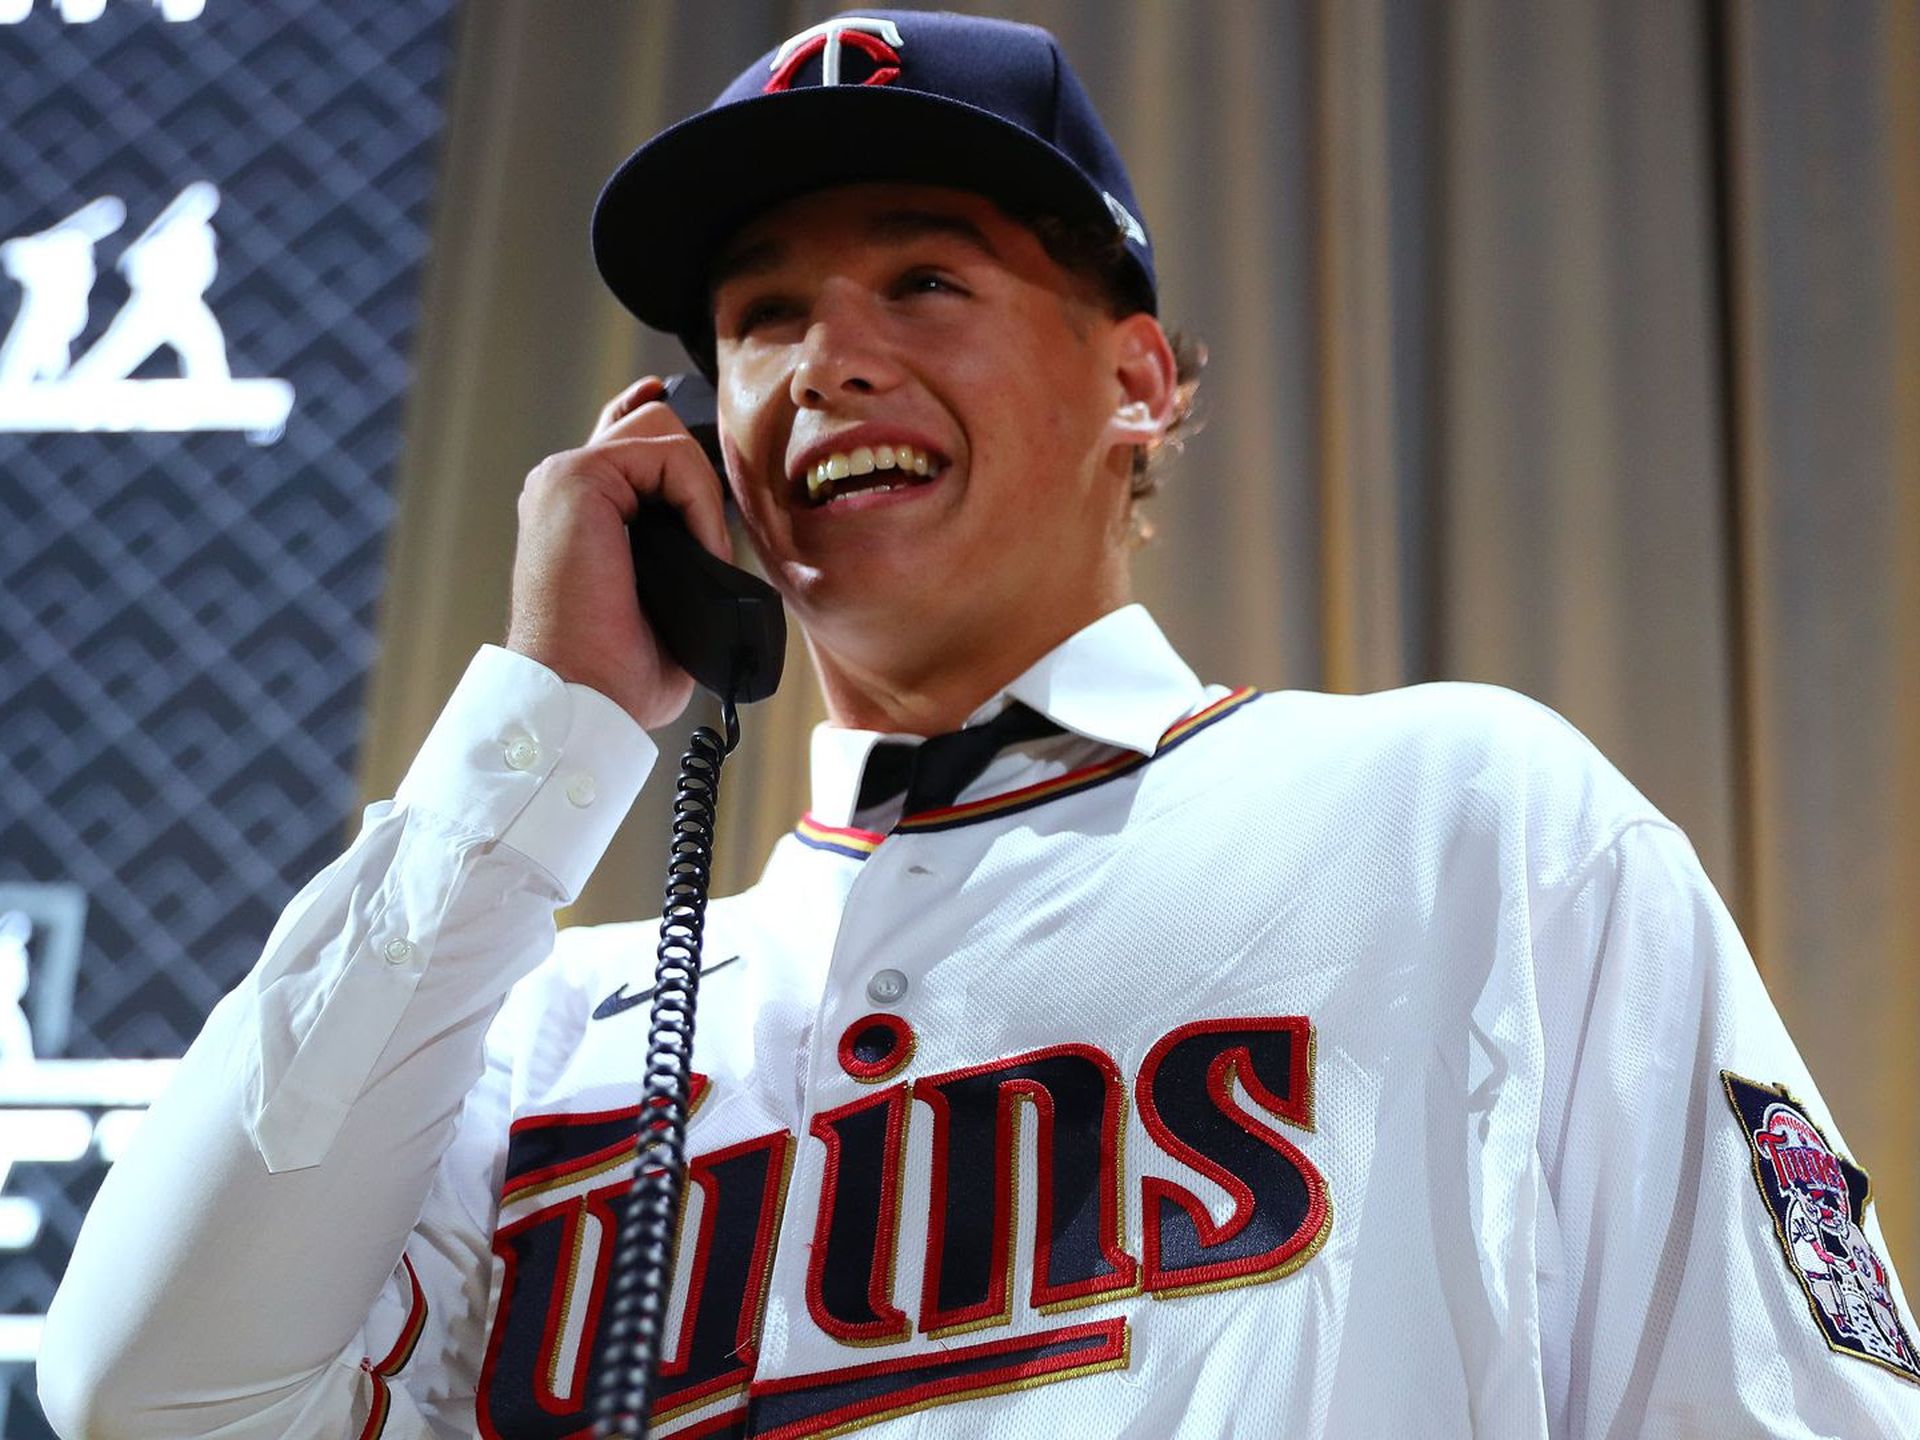 Minnesota Twins season preview 2023: How to fake it - Axios Twin